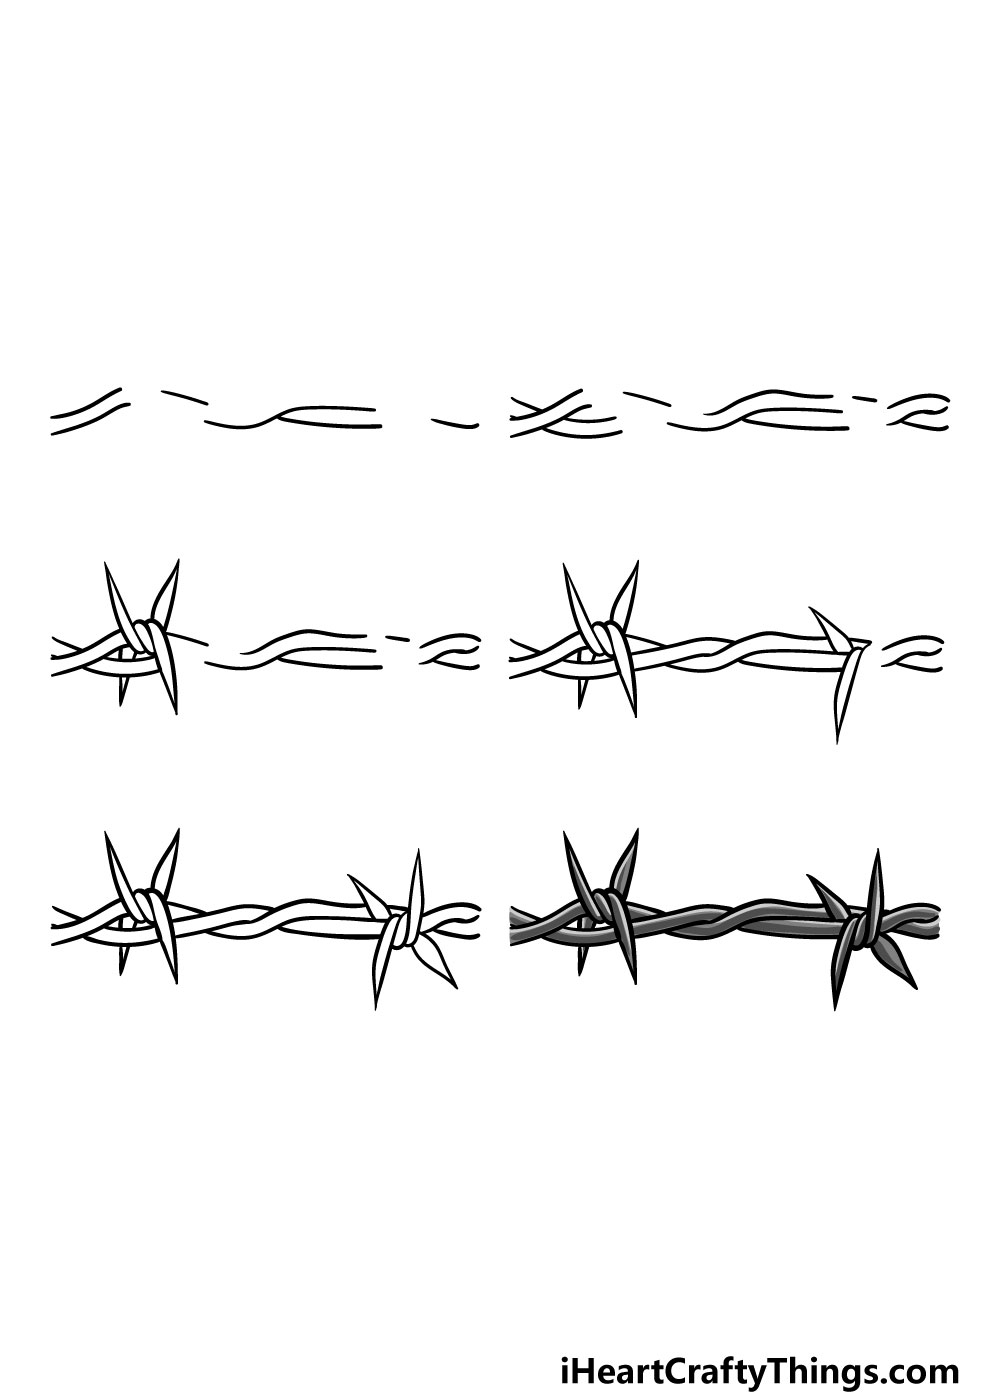 how to draw barbed wire in 6 steps